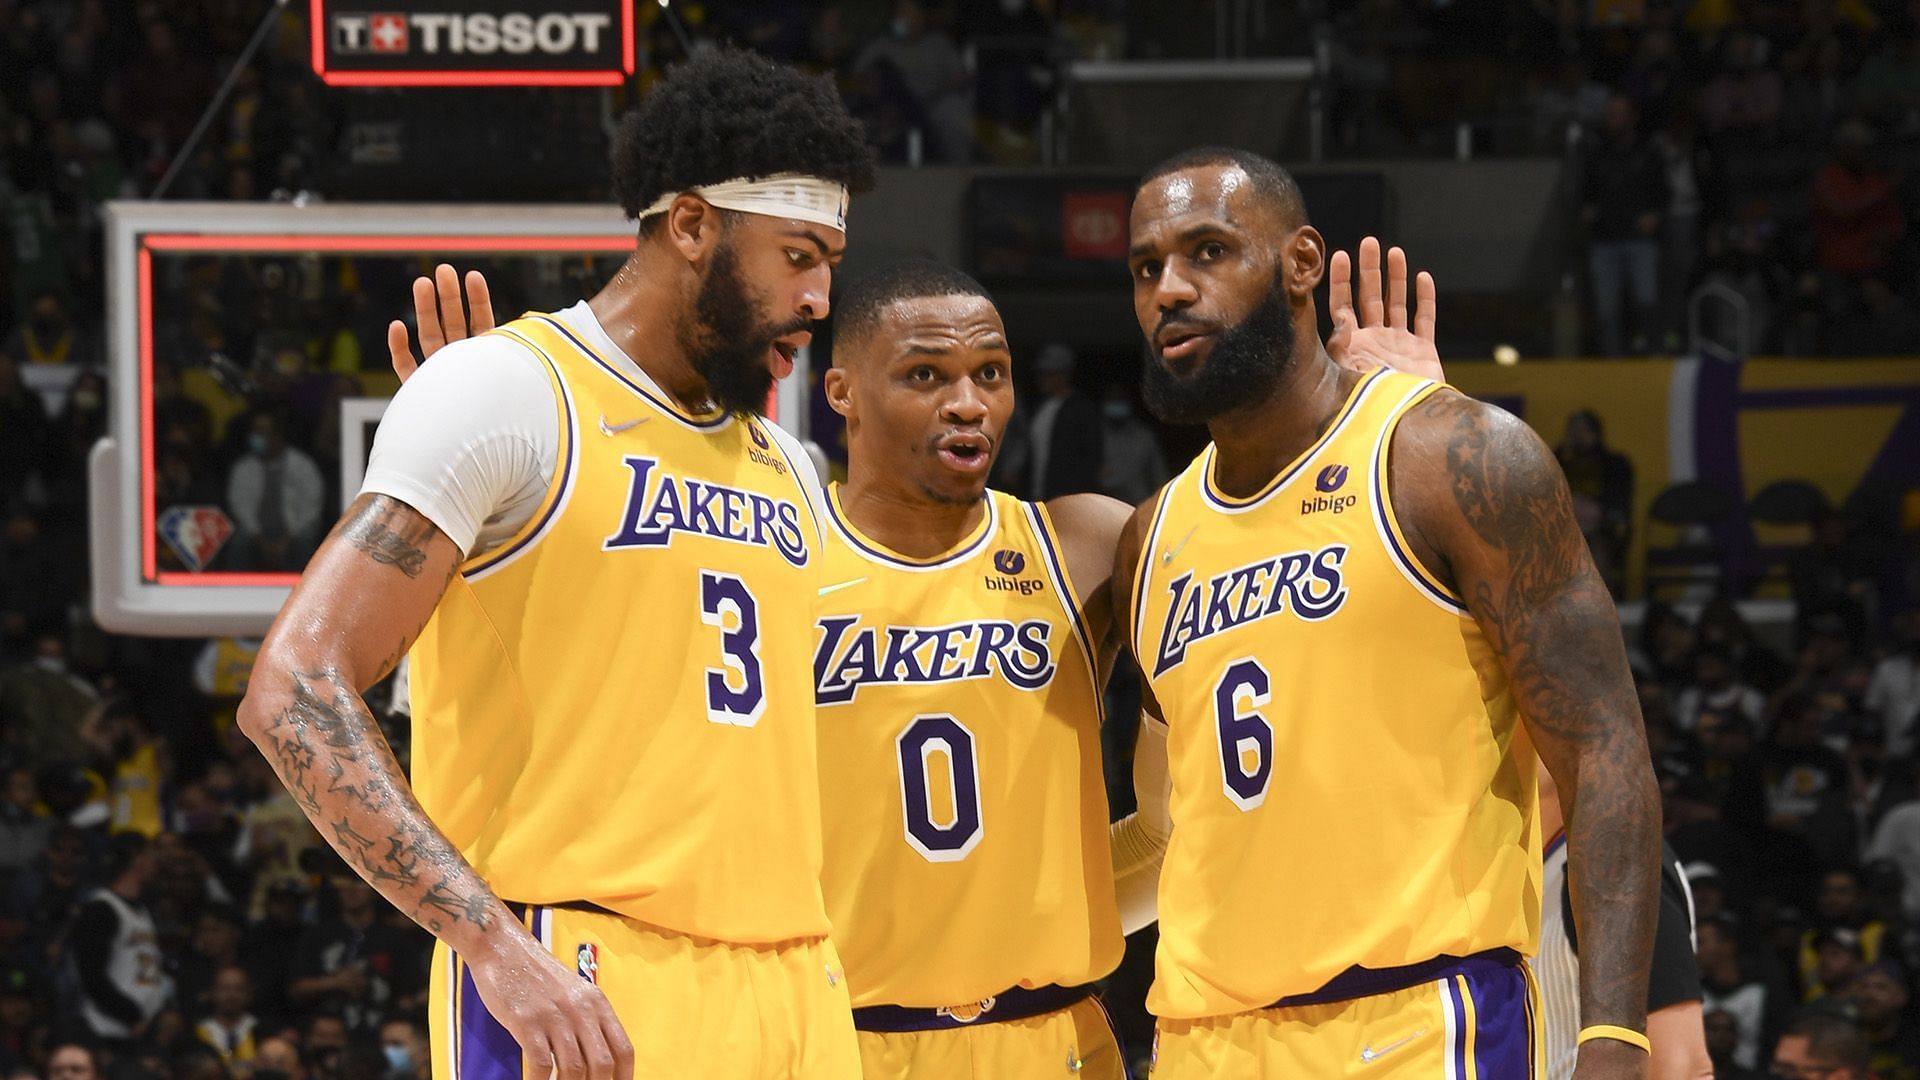 The LA Lakers are outside looking in for the last play-in spot. [Photo: NBA.com]